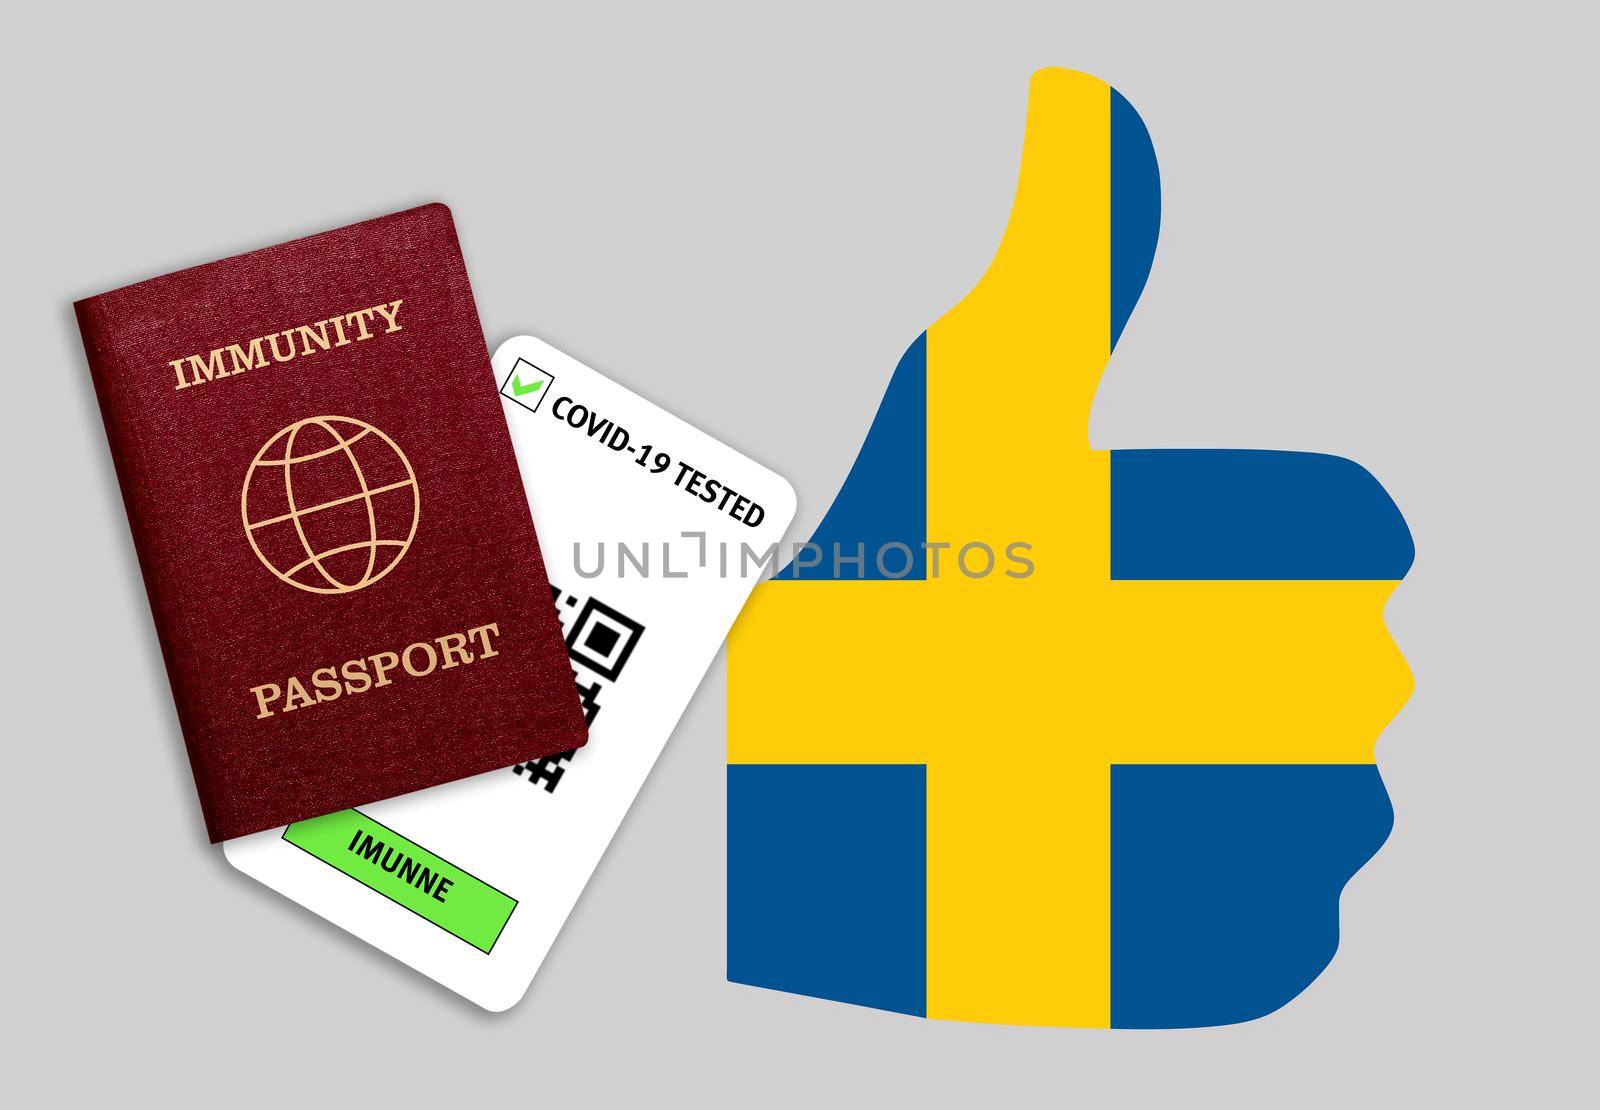 Immunity passport and test result for COVID-19 on flag of Sweden by galinasharapova